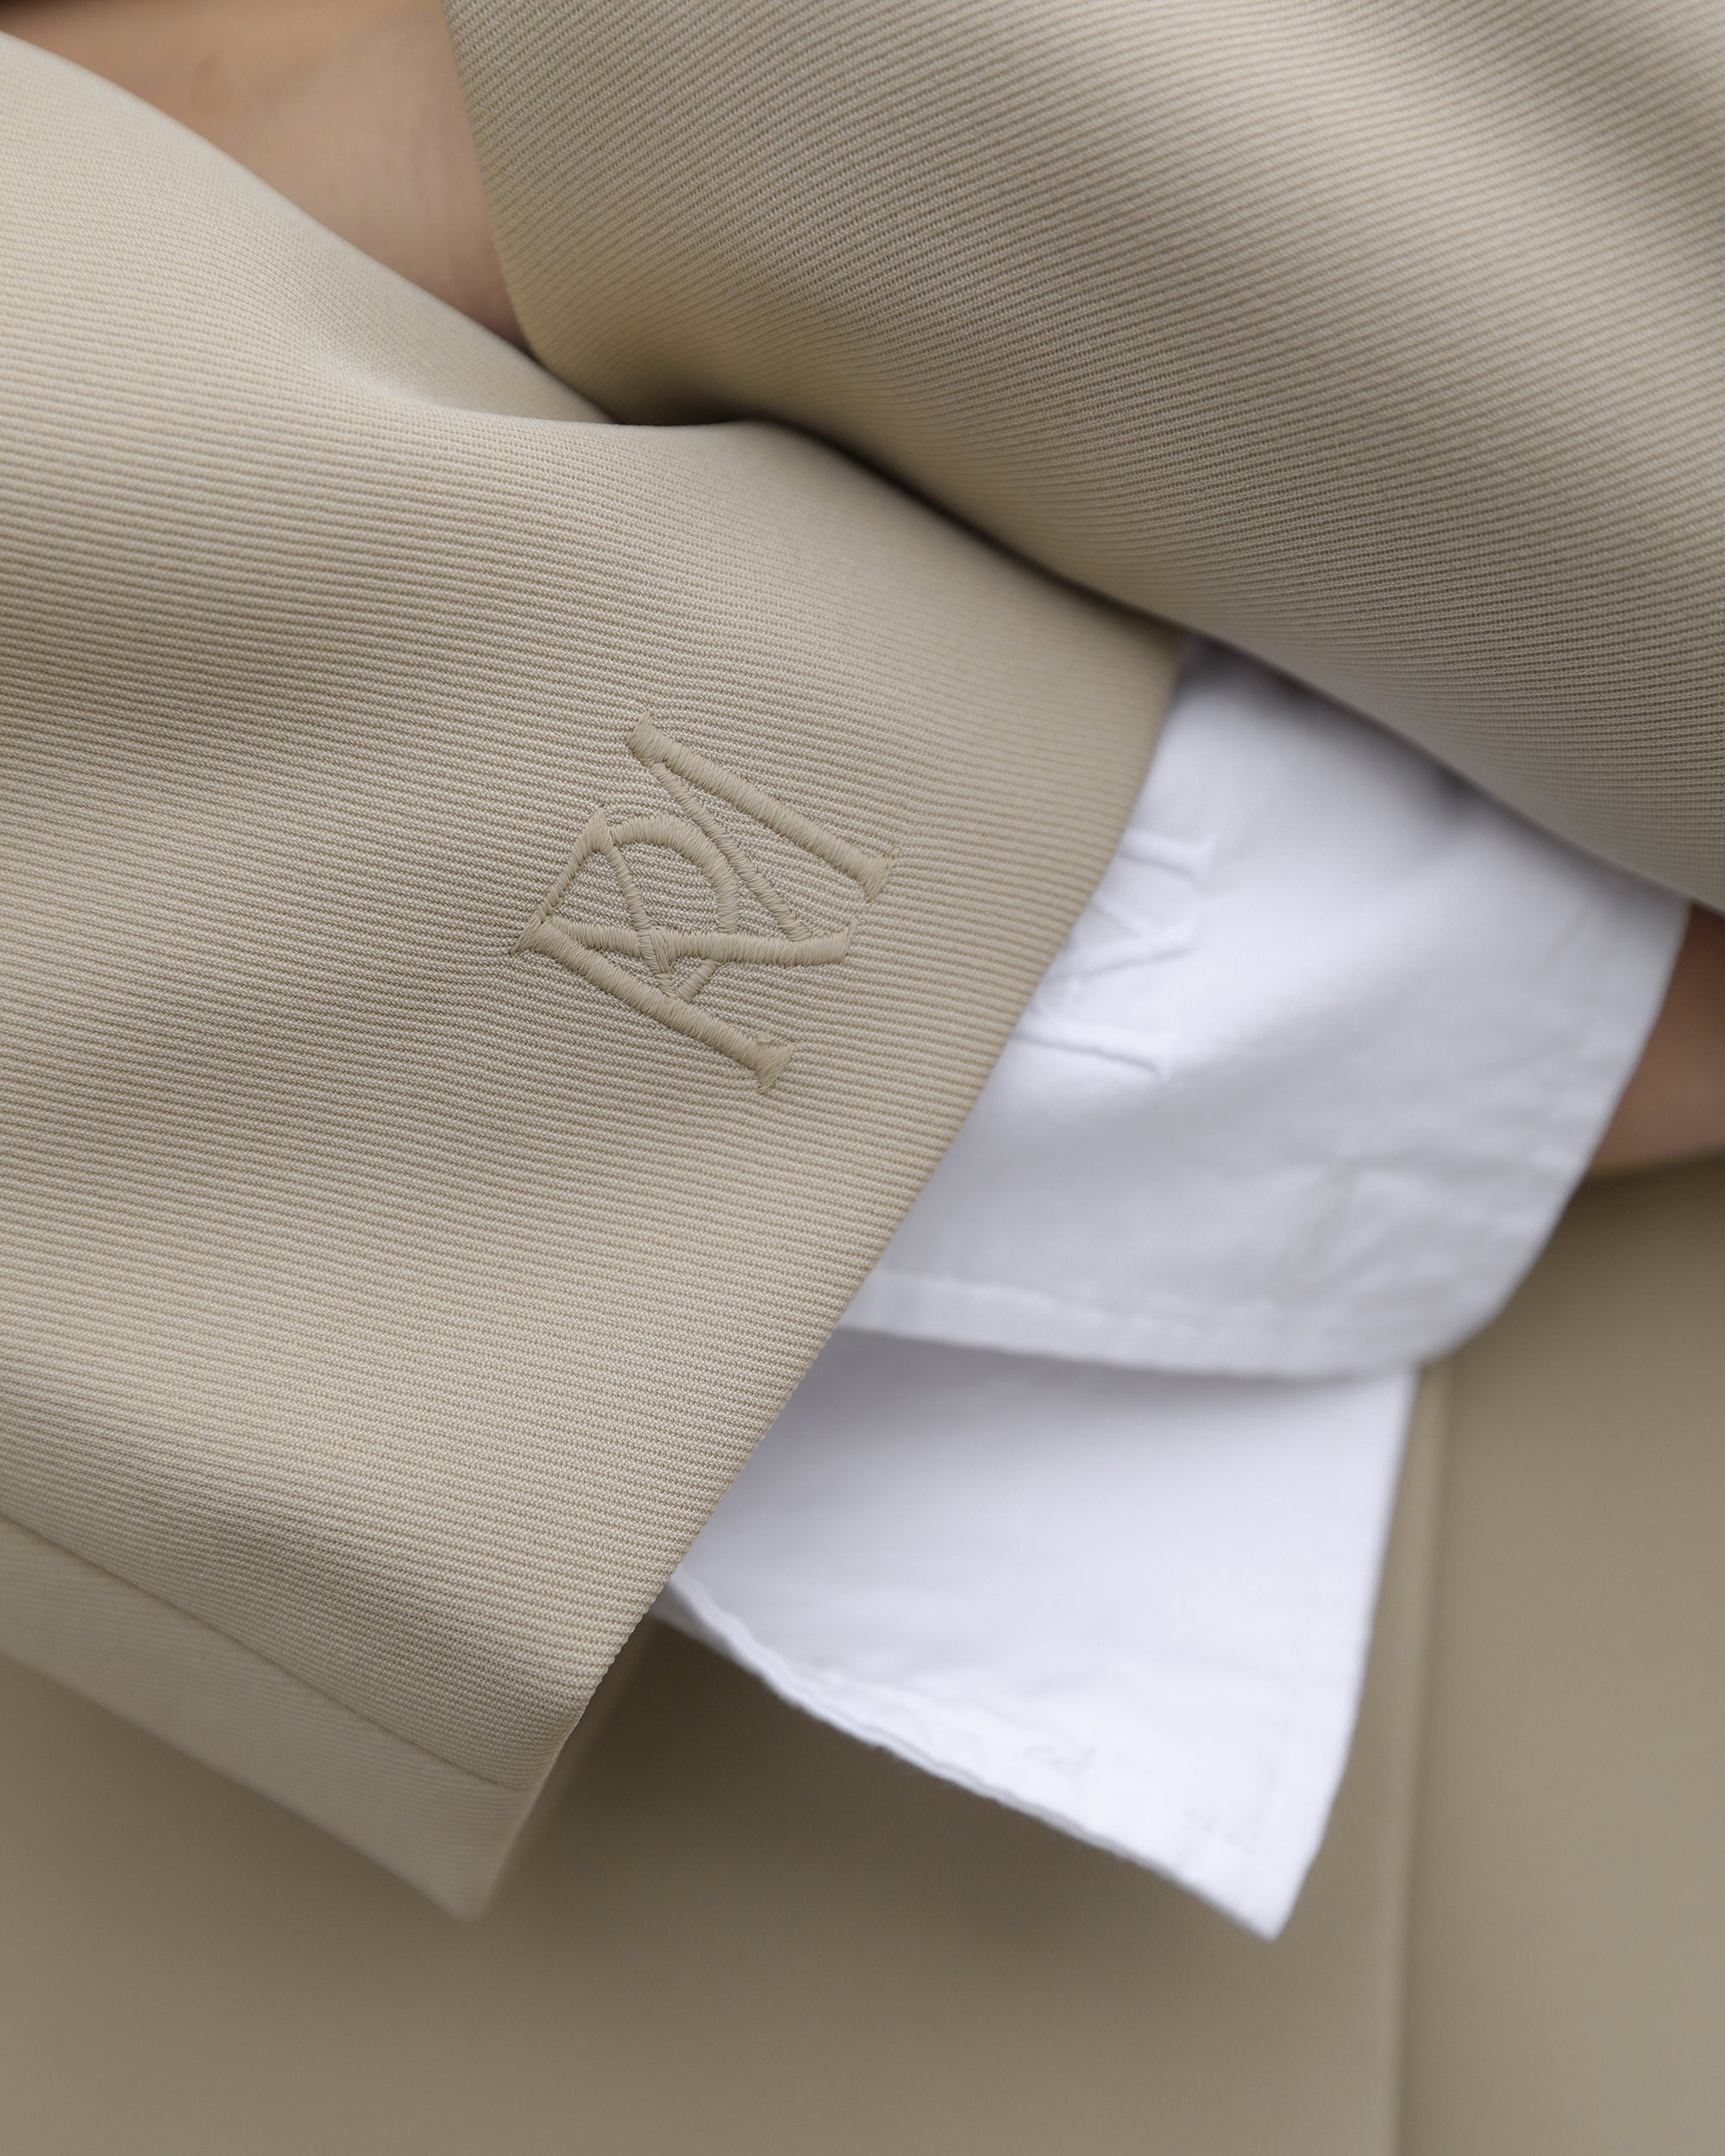 Close up image of a minimalist taupe trench coat with embroidered MRK brandmark on right sleeve, with crisp white shirt poking out from the end of the sleeve, with matching brand mark.